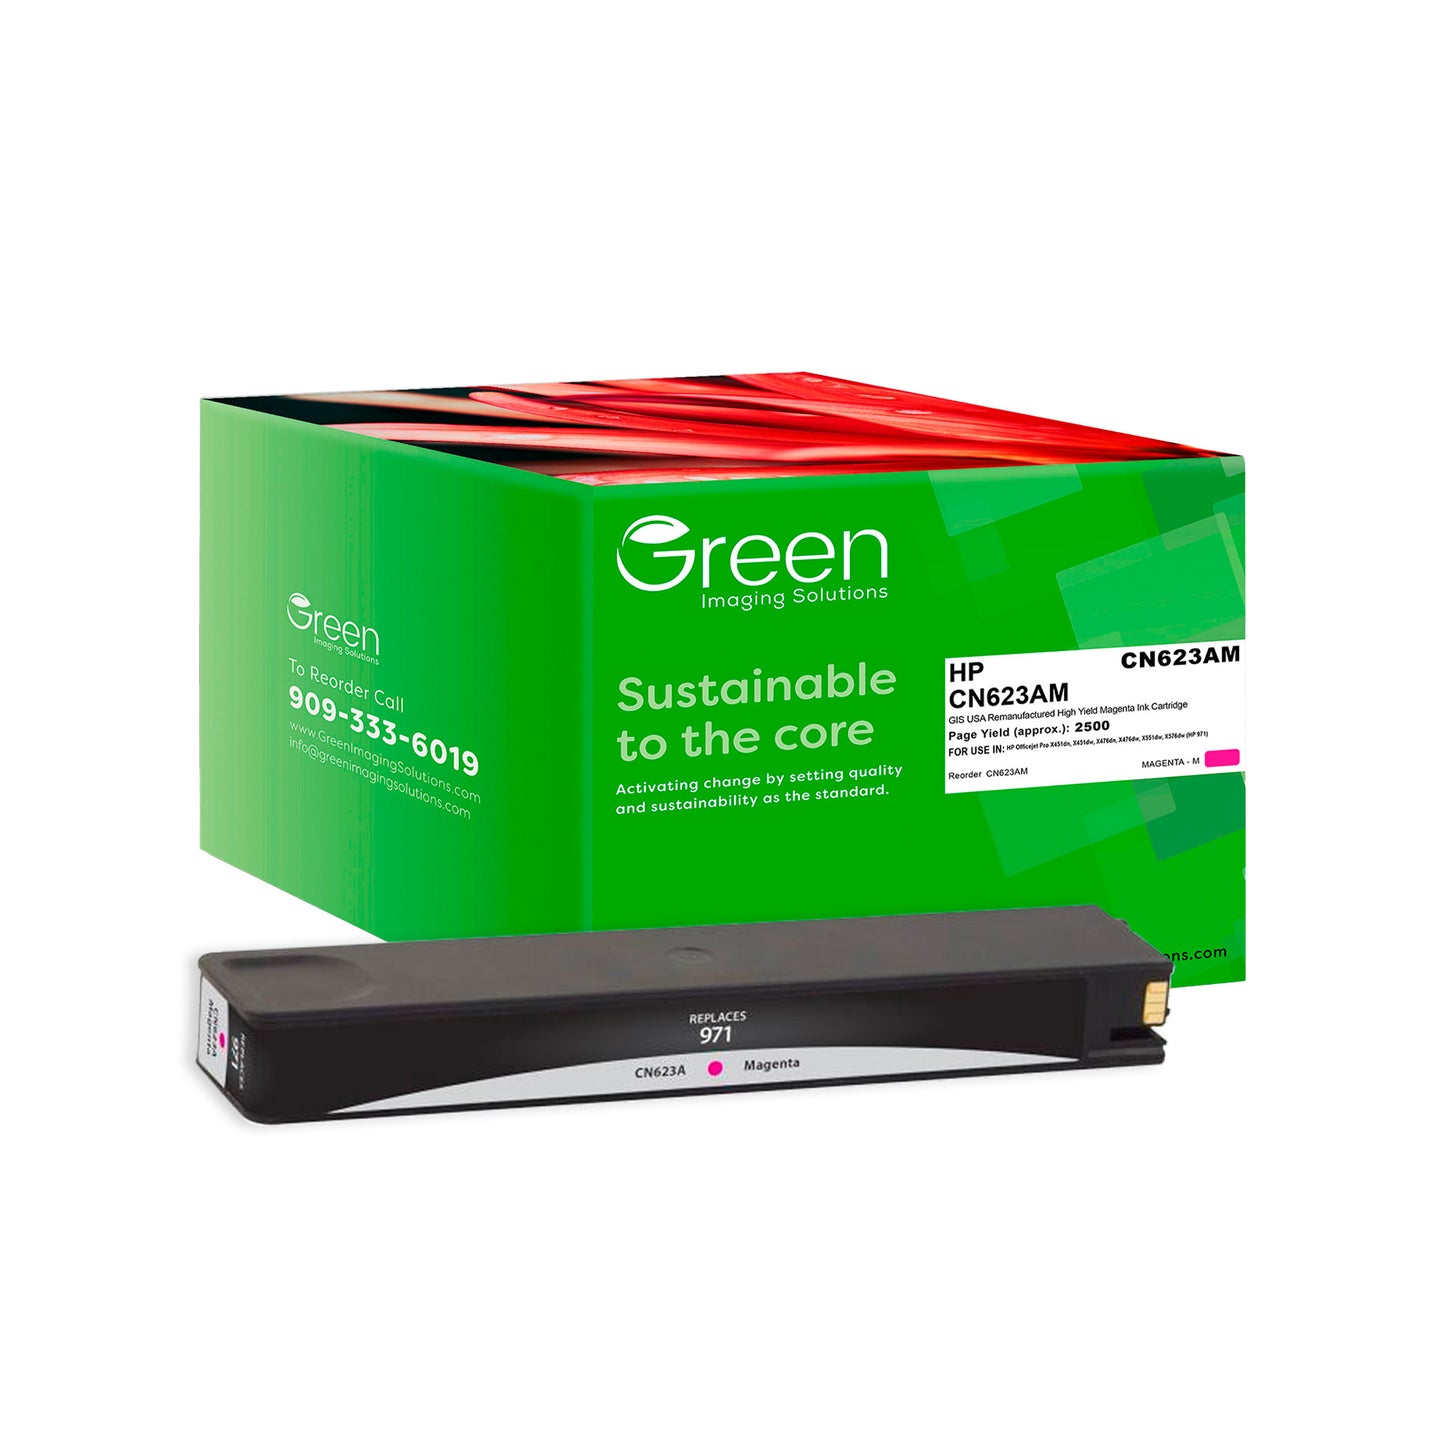 Green Imaging Solutions USA Remanufactured Magenta Ink Cartridge for HP 971 (CN623AM)